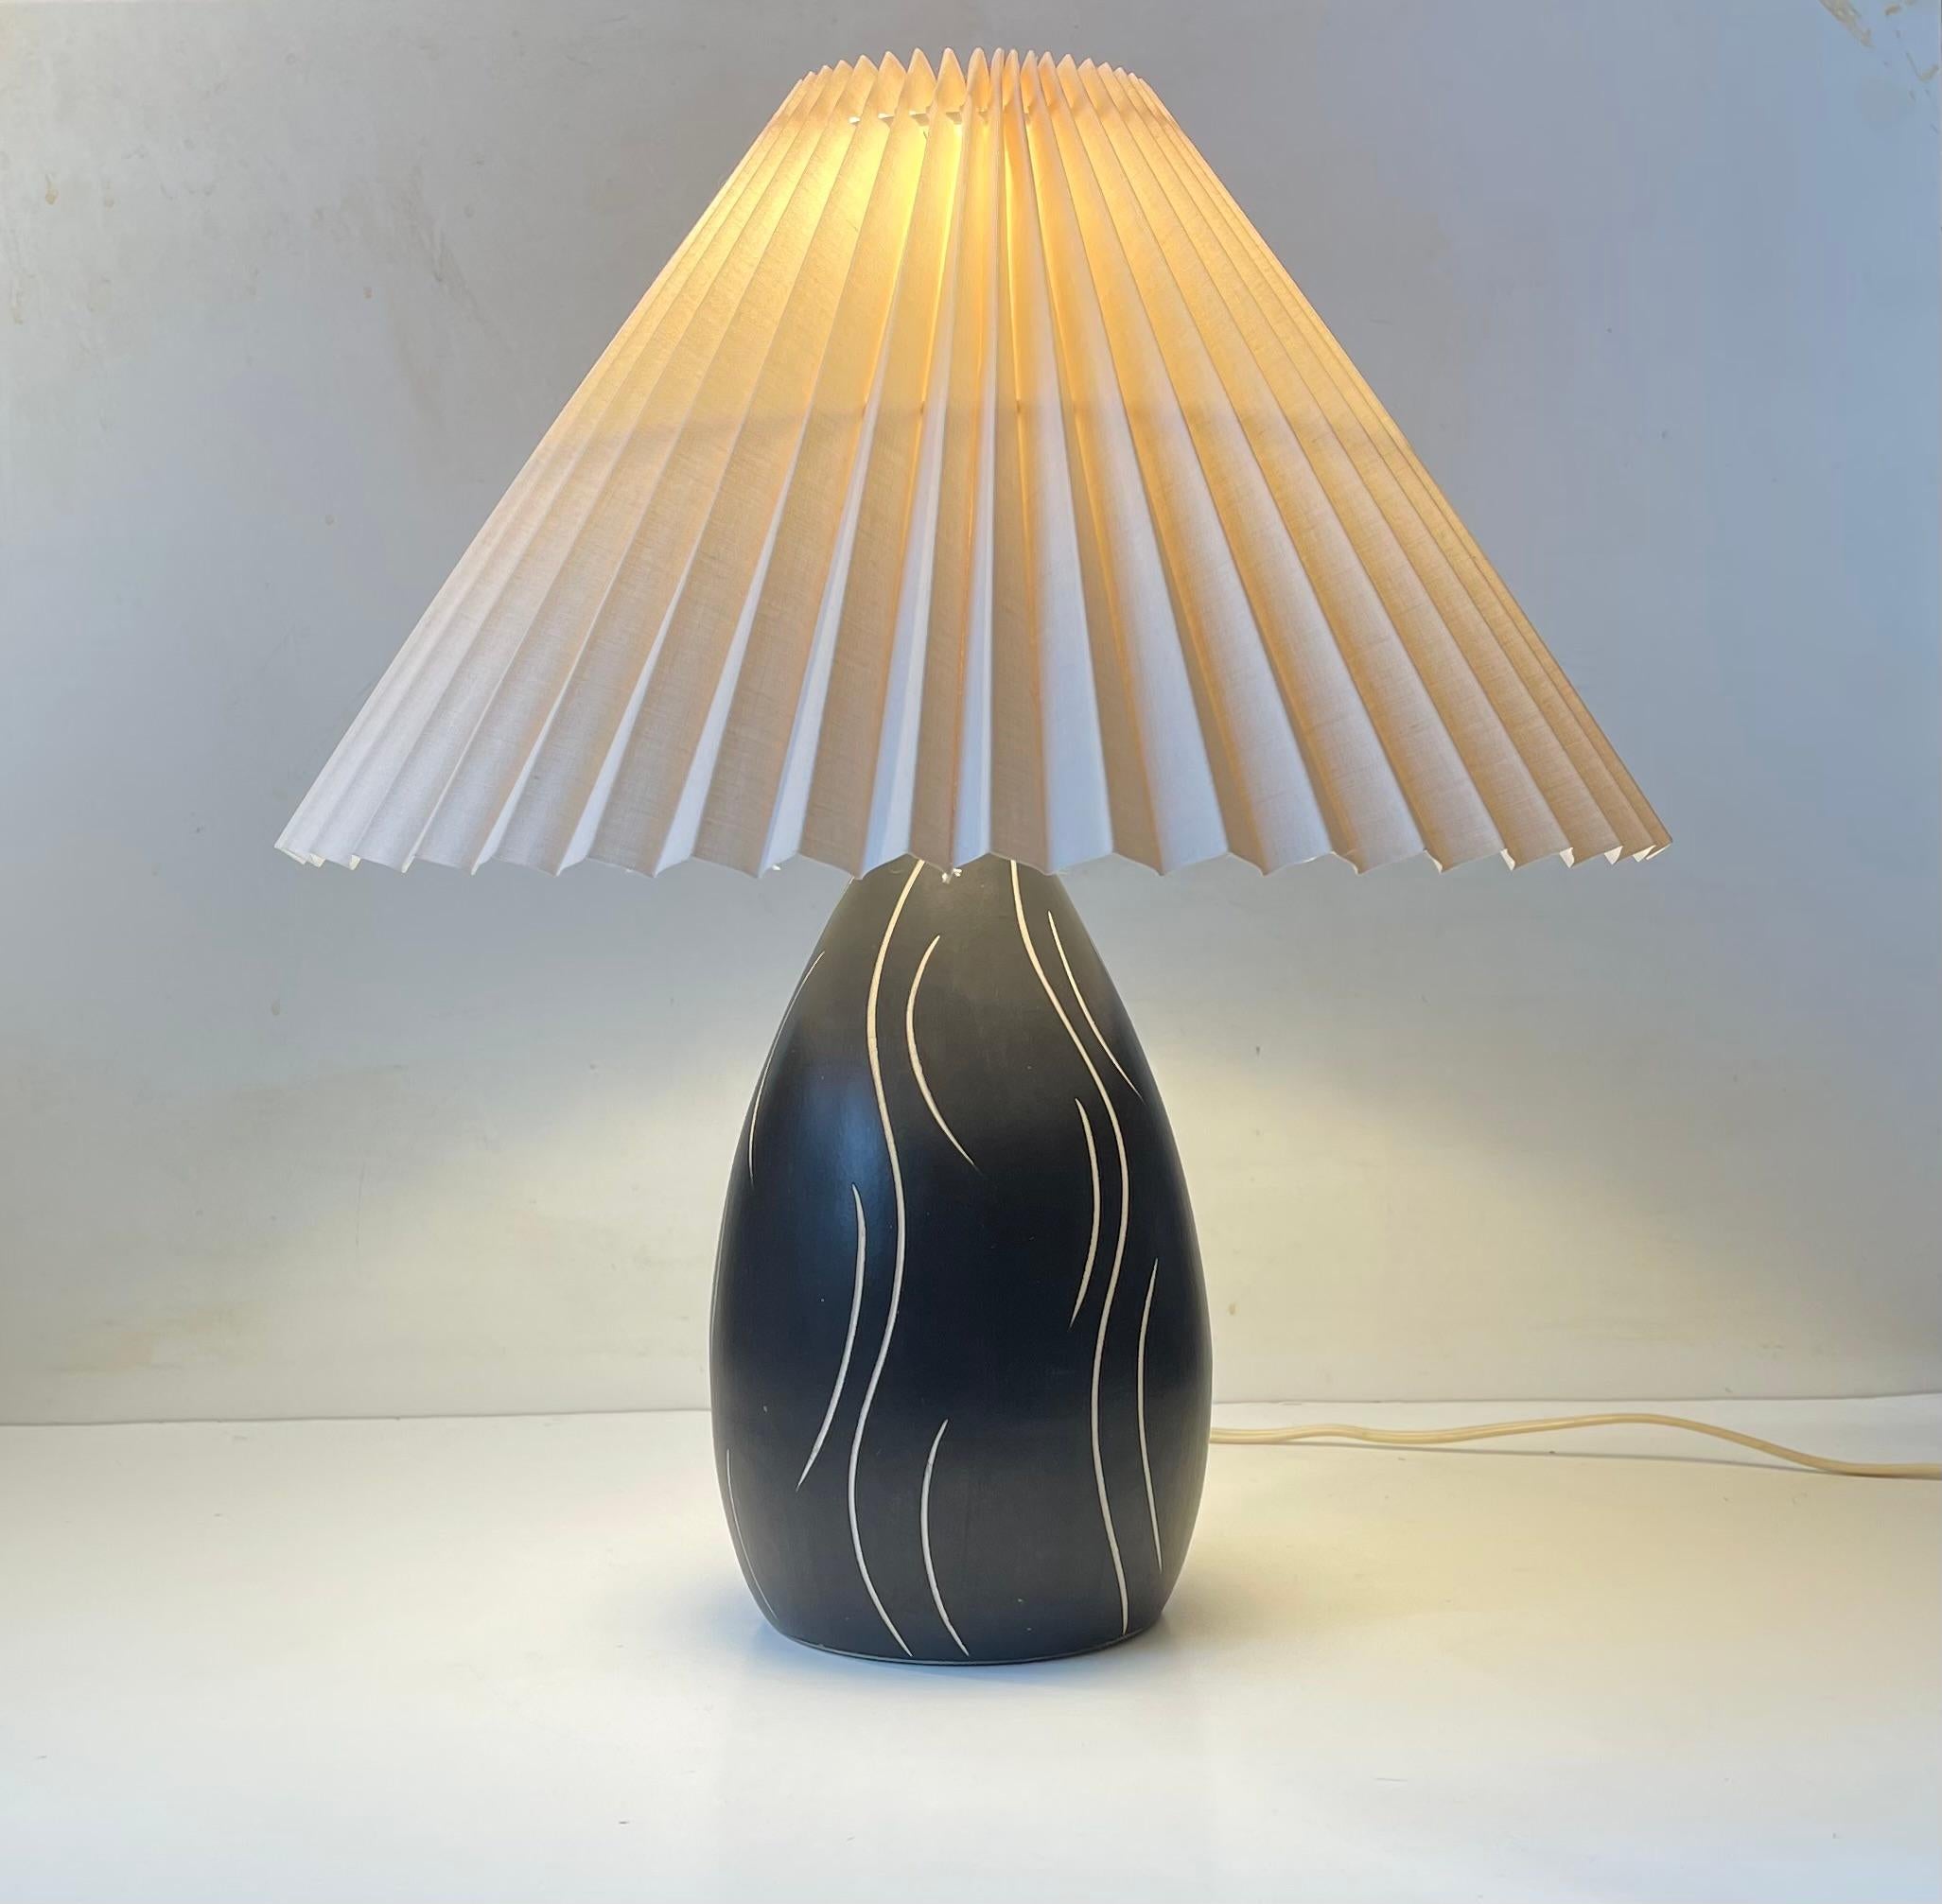 - Black and white glazed ovoid Ceramic table lamp decorated in sgrafitto style. Designed and made by Elisabeth Loholt in Denmark during the 1950s in a style reminiscent of Ingrid Atterberg and Michael Andersen. Made for E. S. Horn in Denmark. This